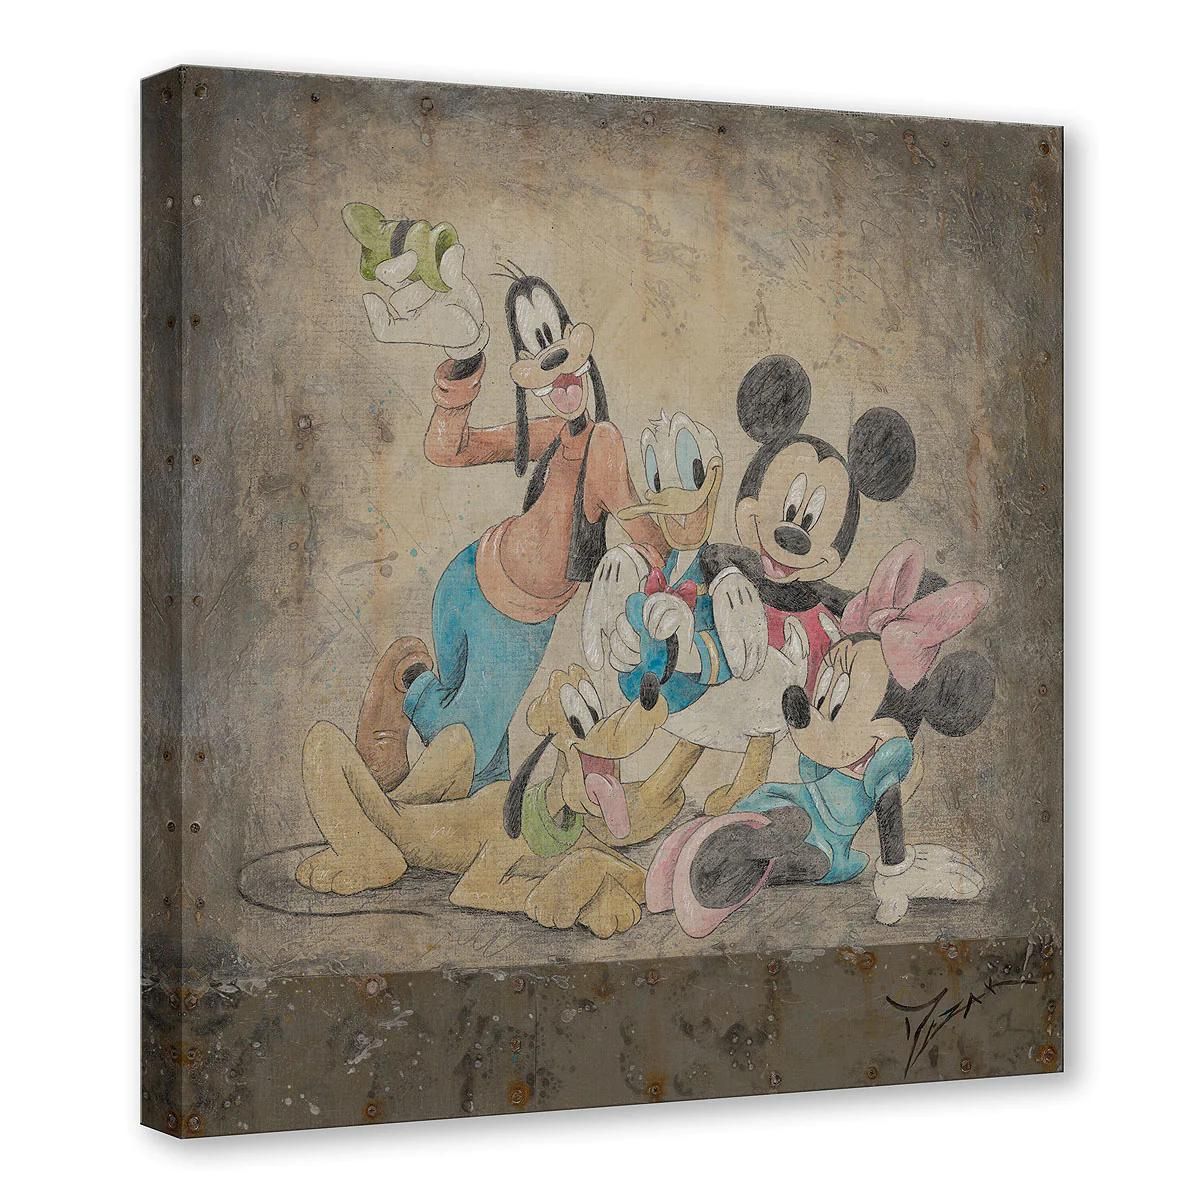 Mickey the train conductor. Gallery Wrapped Canvas